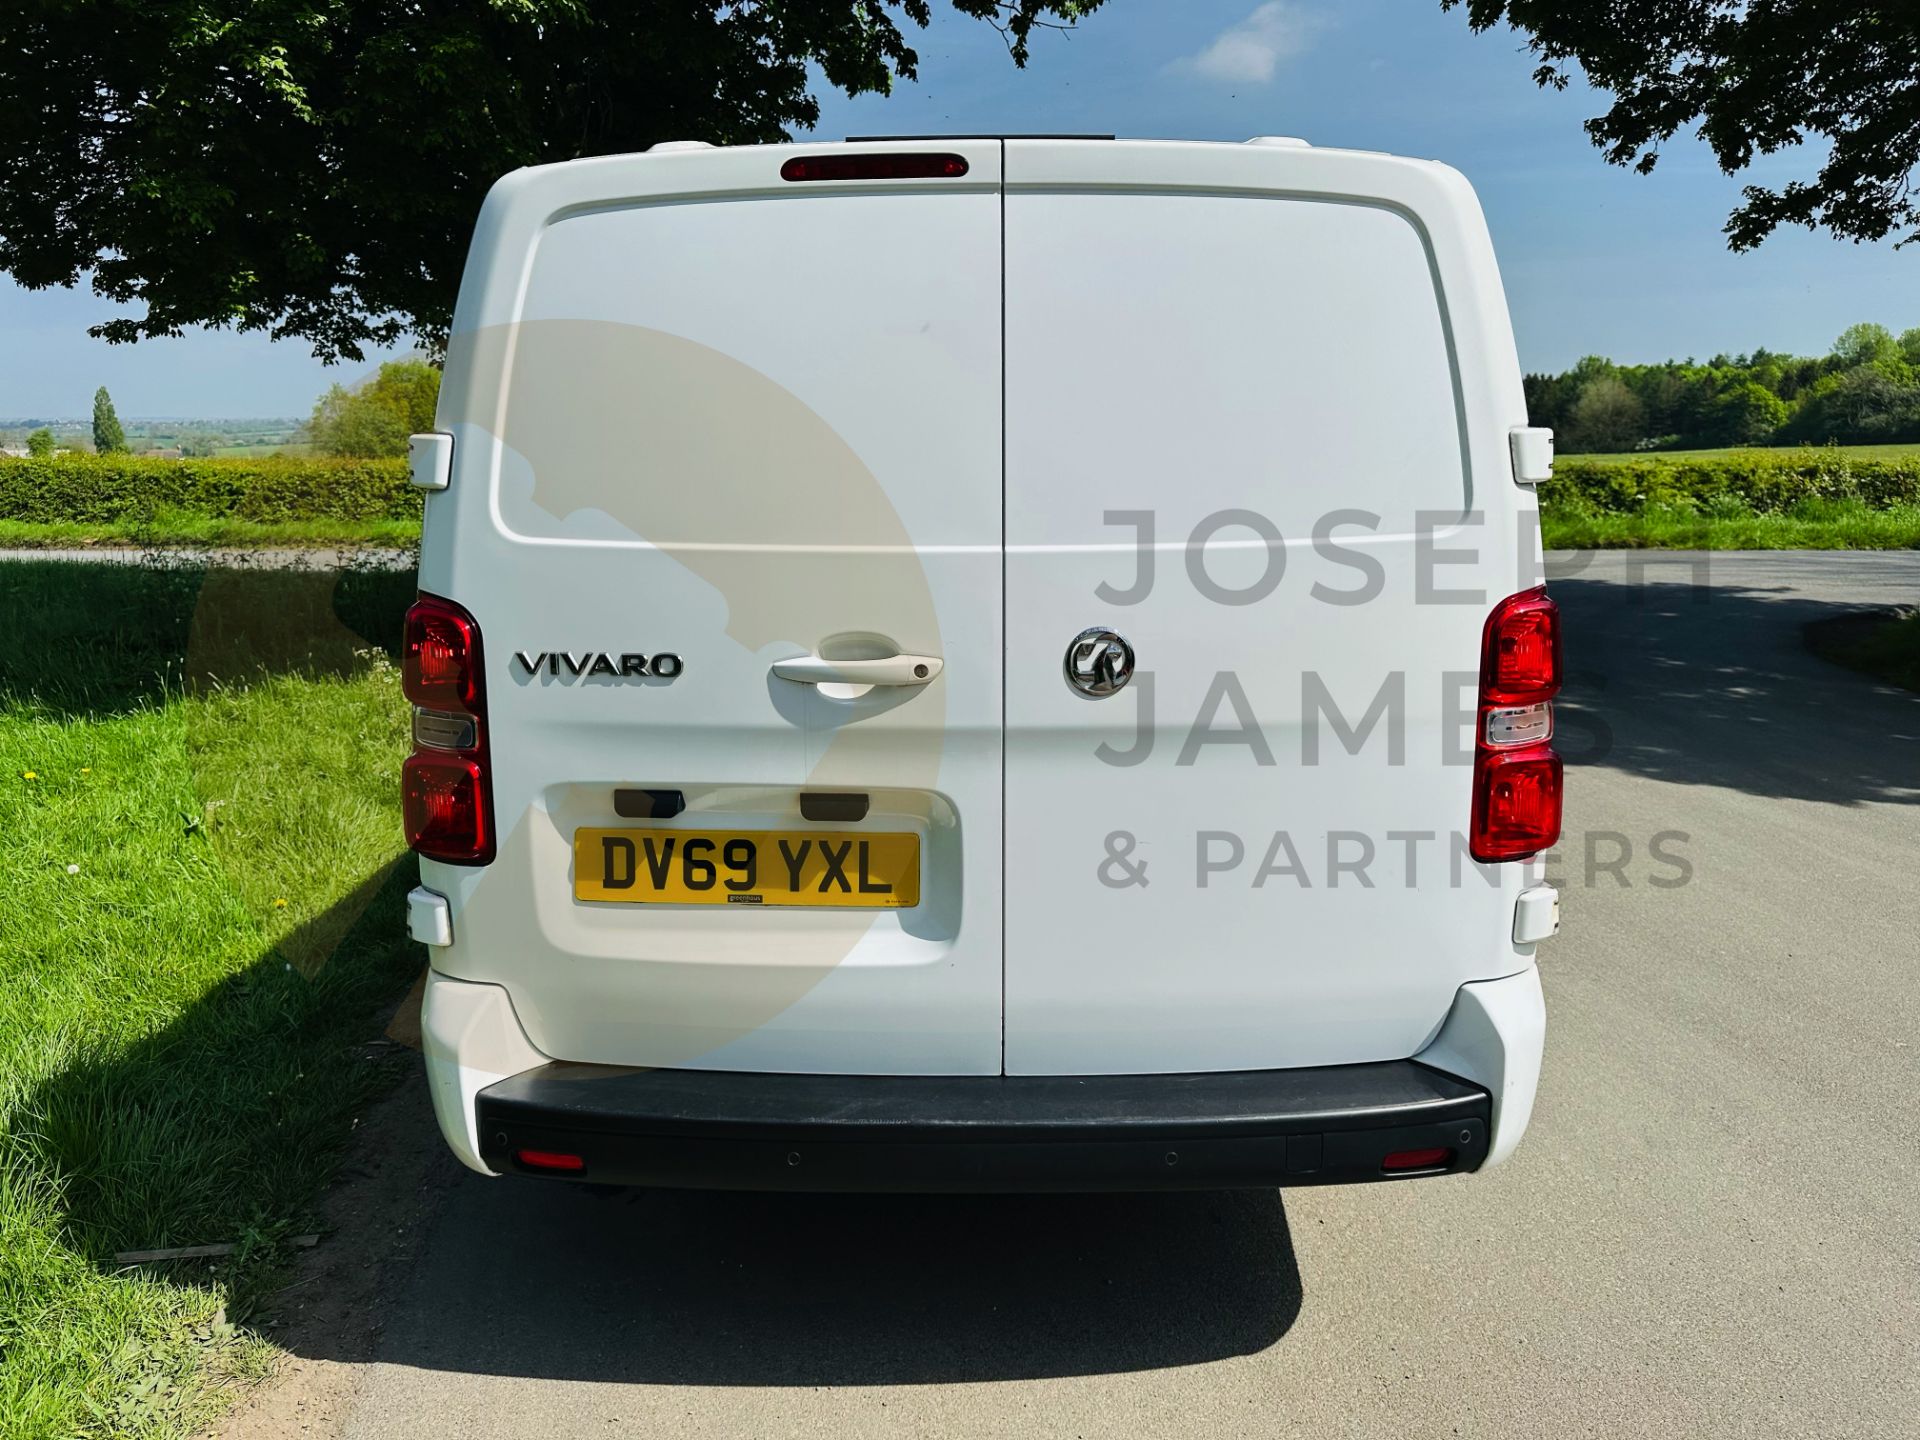 (On Sale) VAUXHALL VIVARO 2900 S/S *SPORTIVE EDITION* EXTENDED FRAME (BLUEINJECTION) - 2020 MODEL - Image 8 of 32